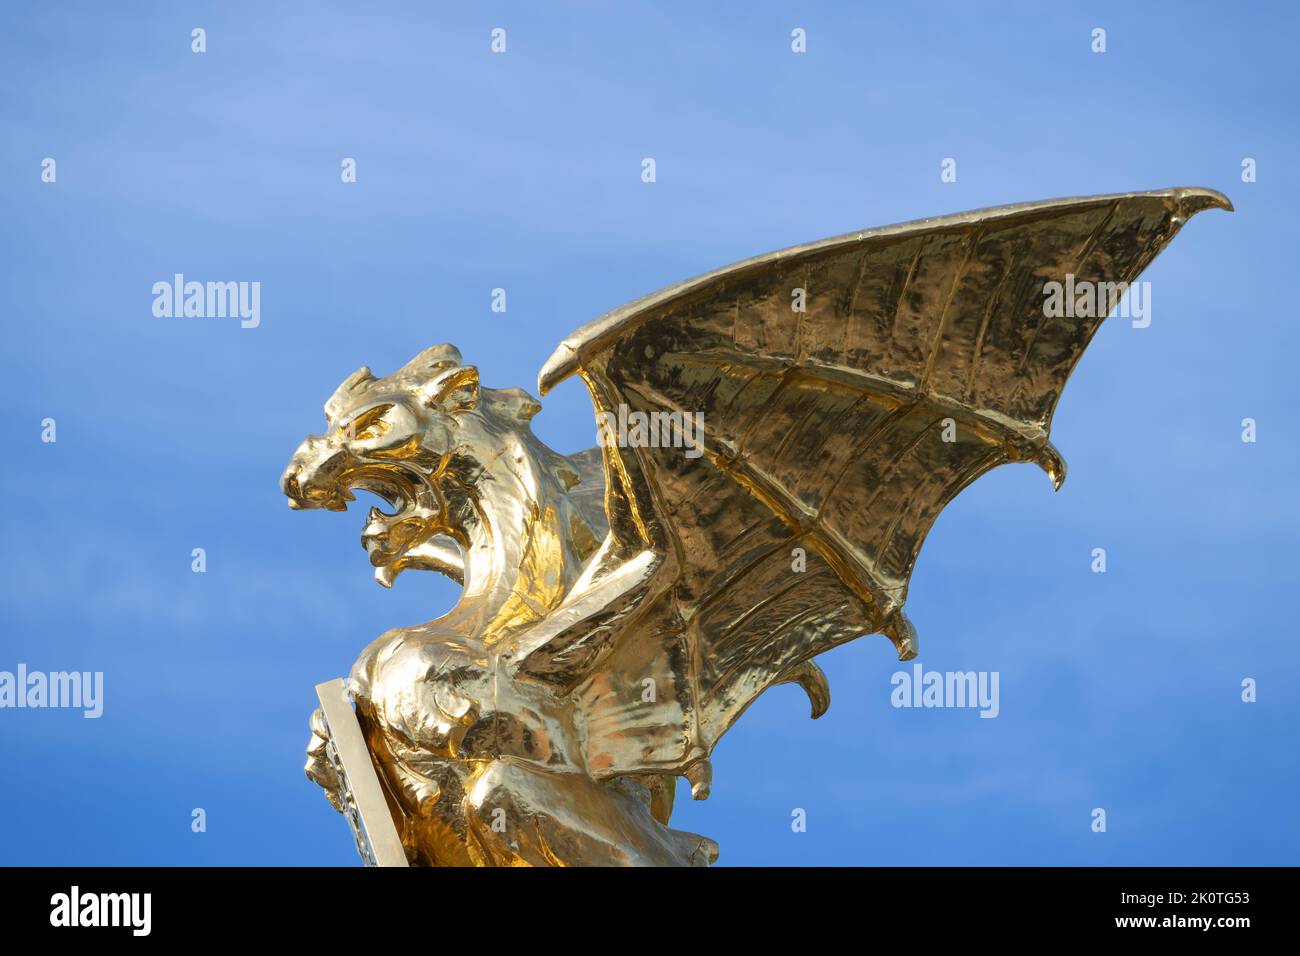 A gilded dragon on top of a fountain in Den Bosch. It was placed in 1903 on the crossing 'Stationsweg' and 'Koninginnelaan'. Stock Photo